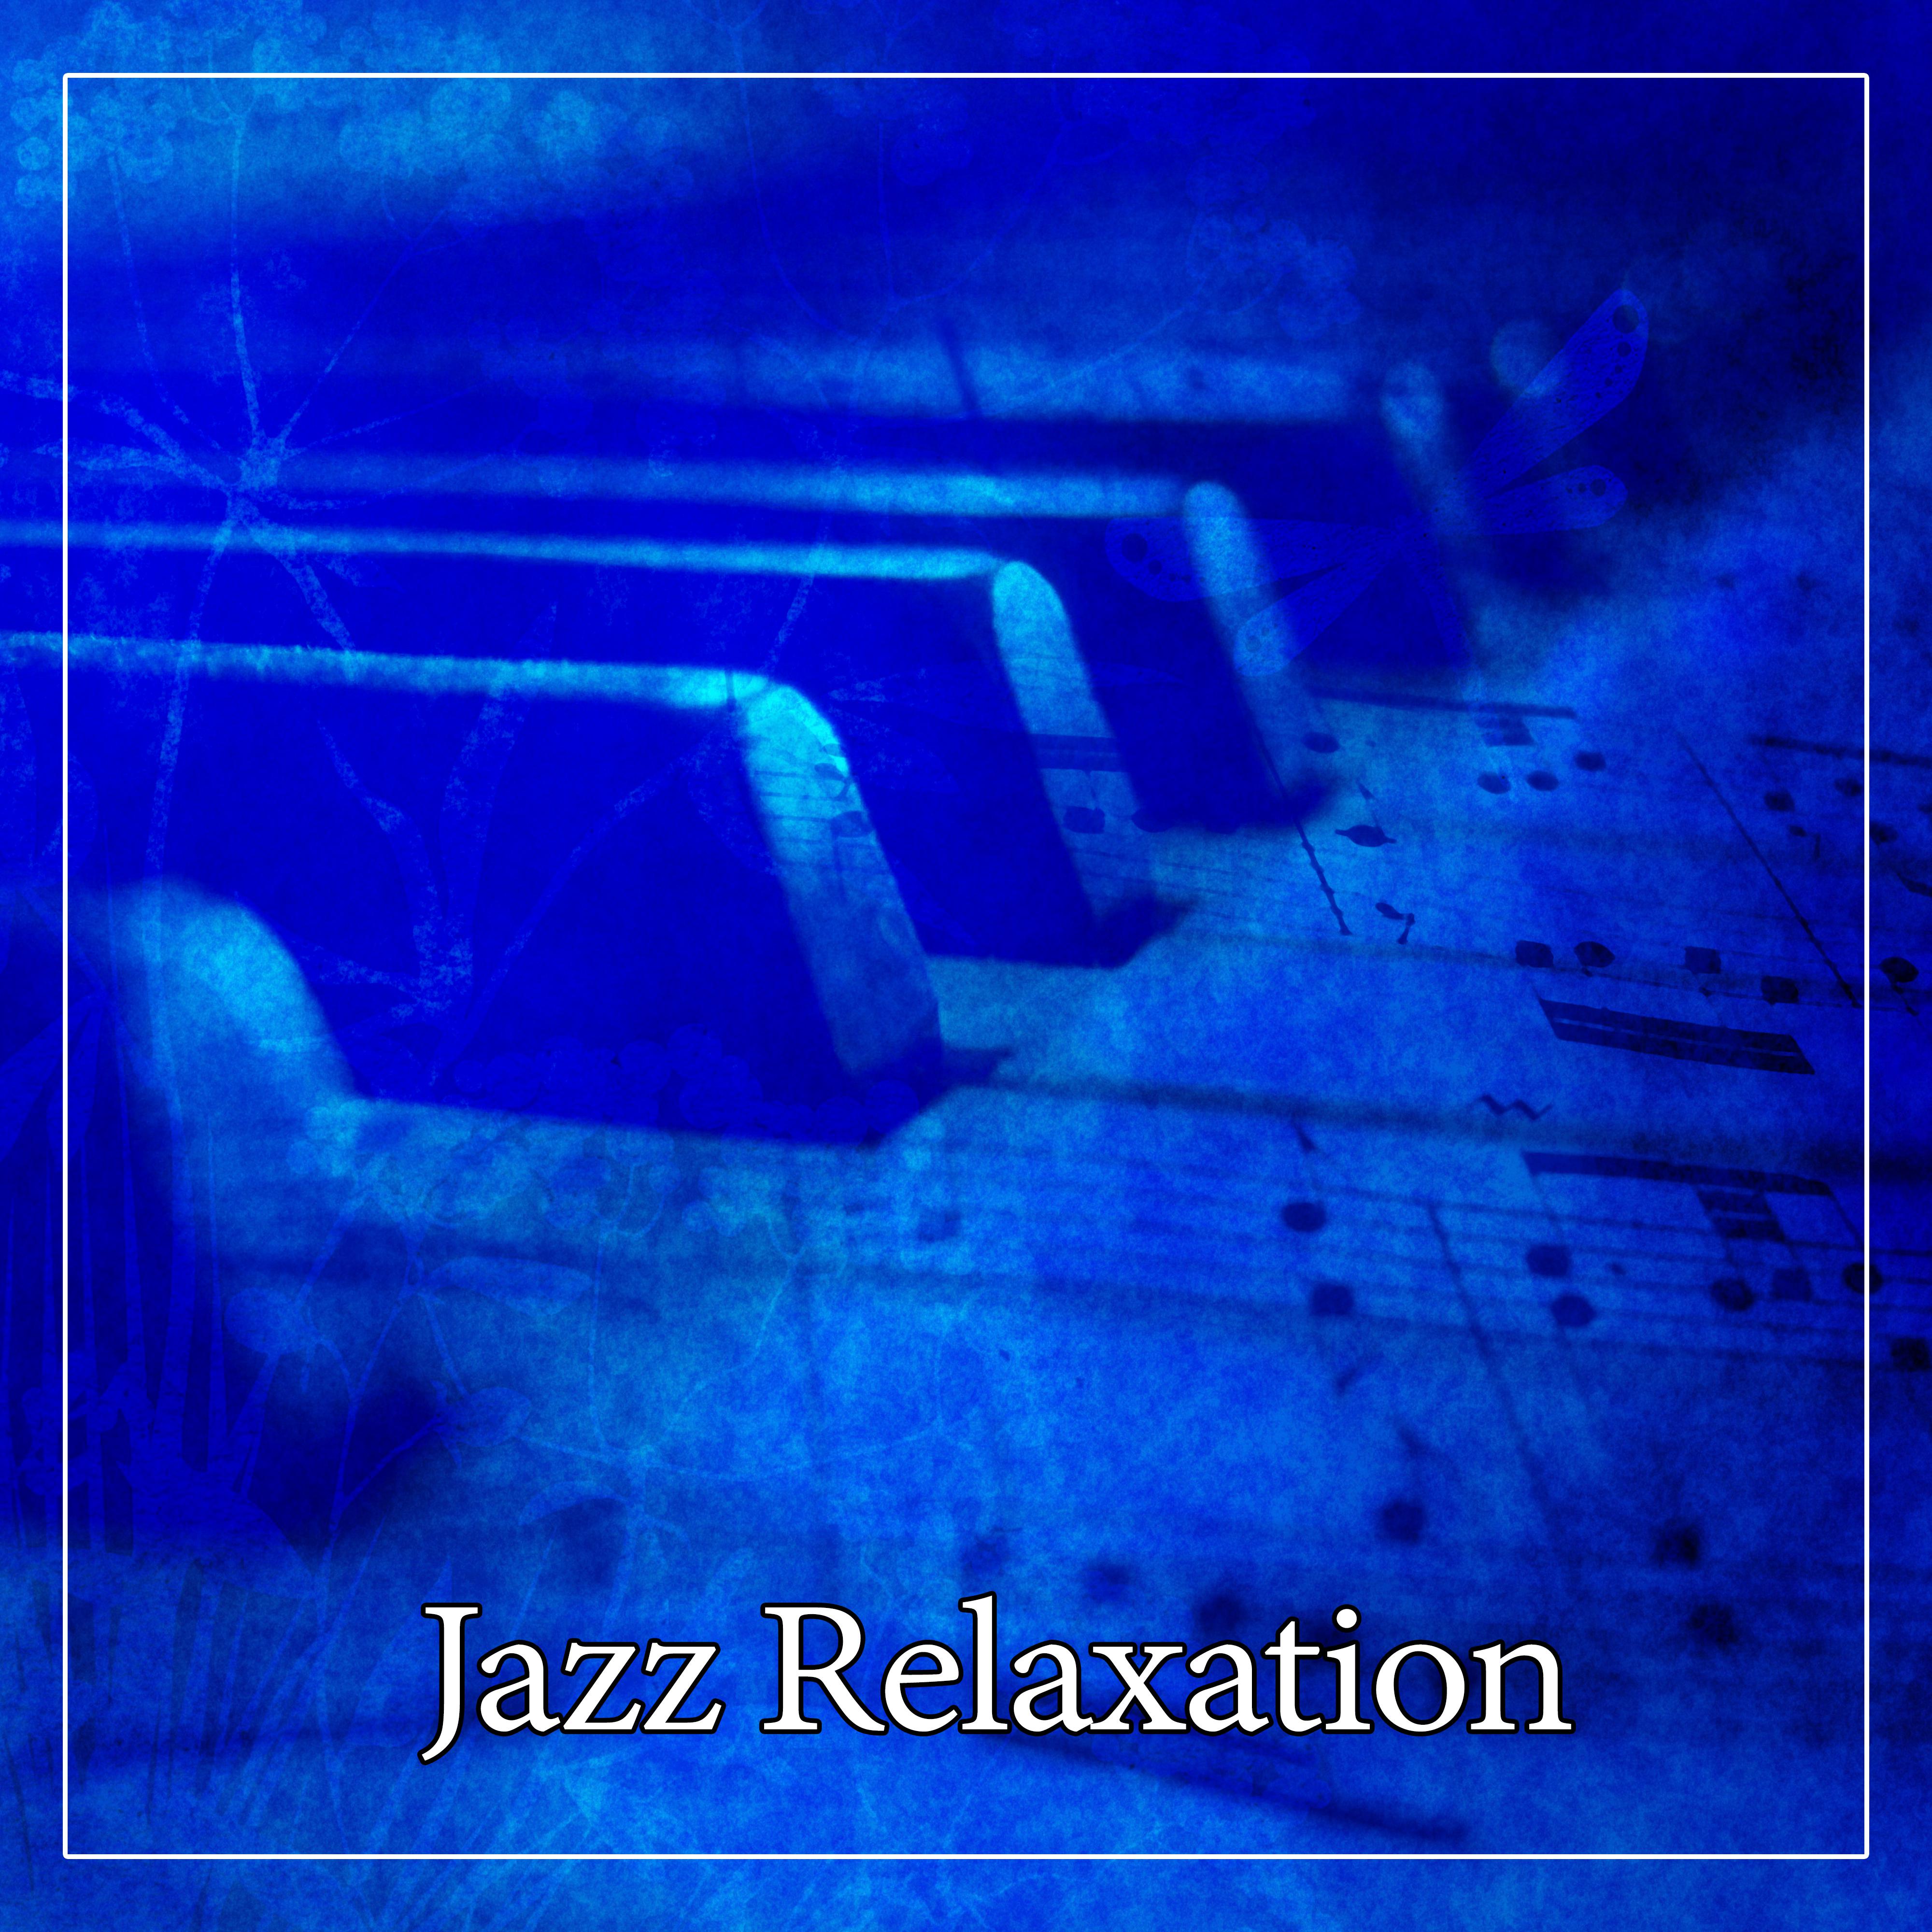 Jazz Relaxation – Calm Jazz Music, Soft Jazz Sounds, Ambient Music, Most Streaming Jazz Sounds